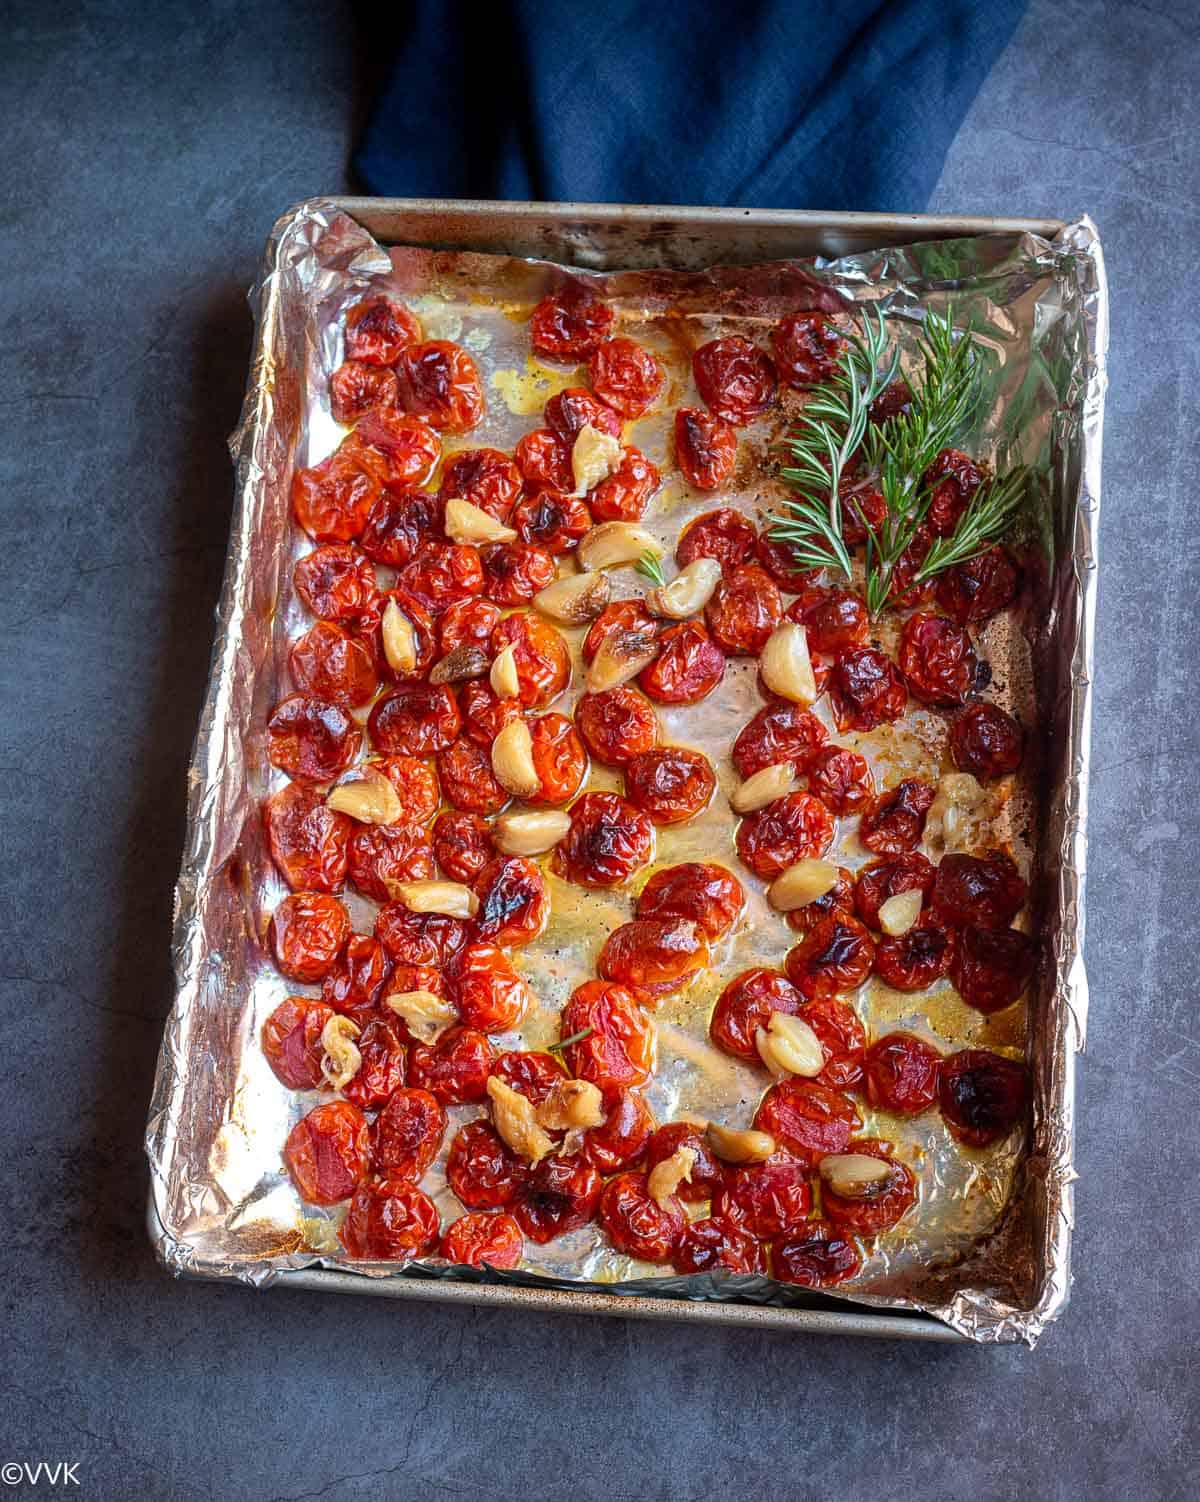 oven roasted tomatoes and garlic placed on baking tray